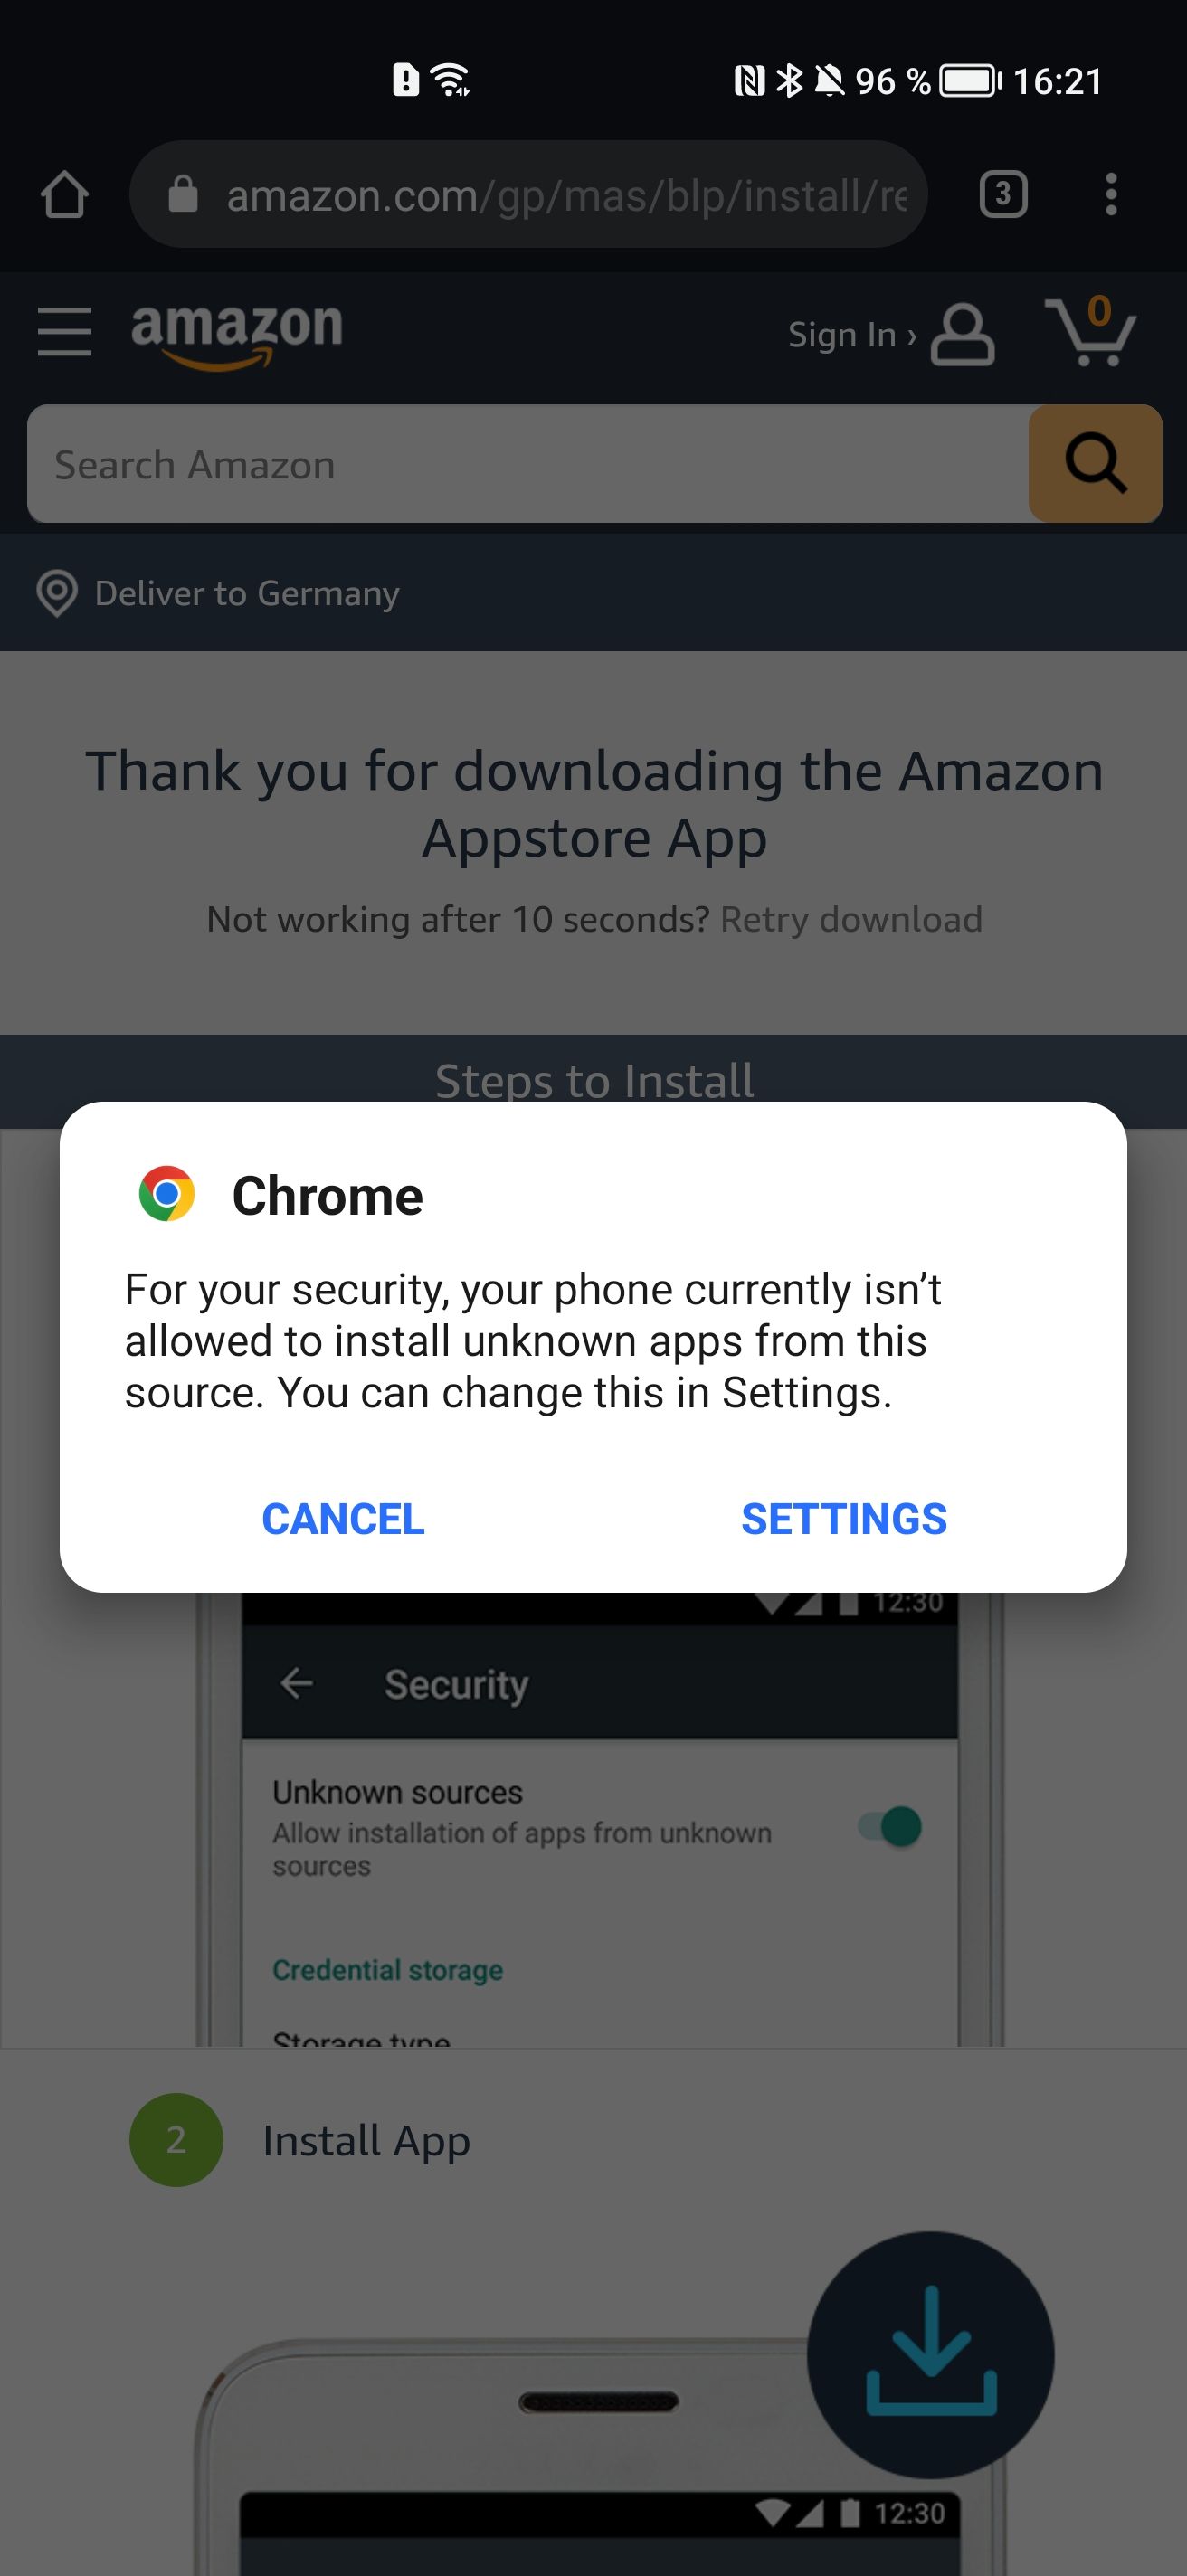 The Chrome mobile warning message that it can't install apps from unknown sources.